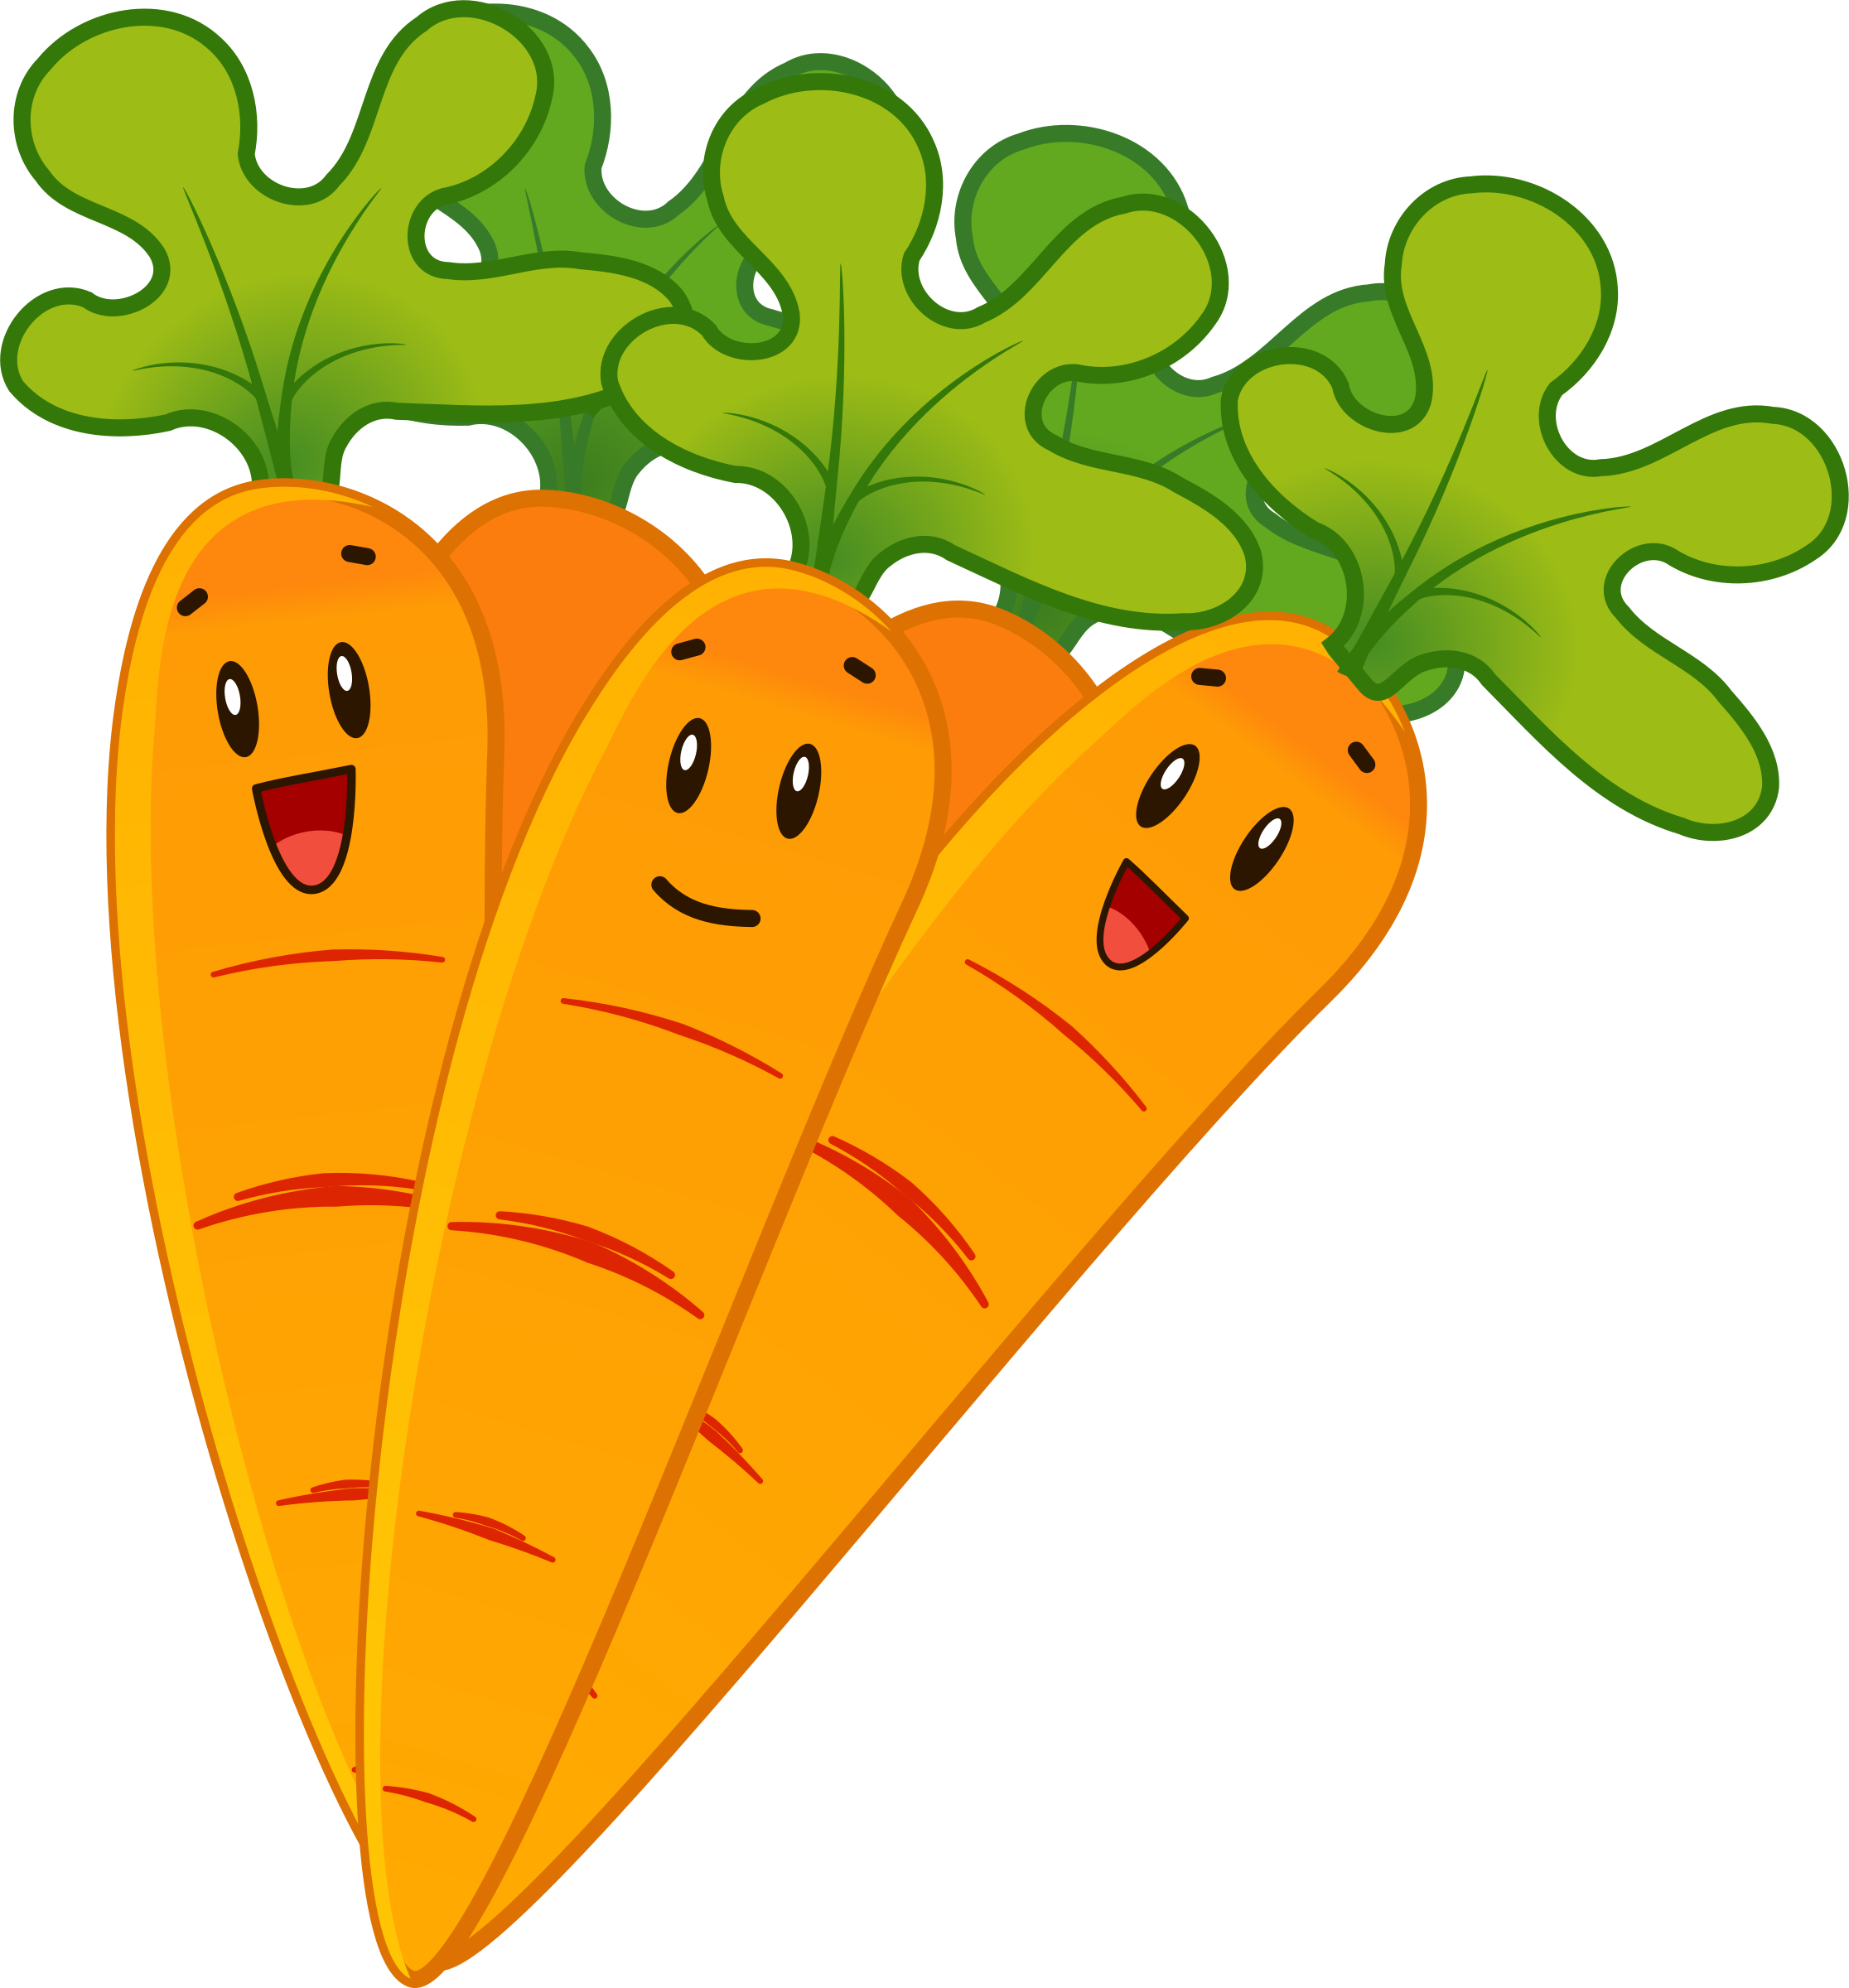 Vegetables clipart sign.  carrot vector image